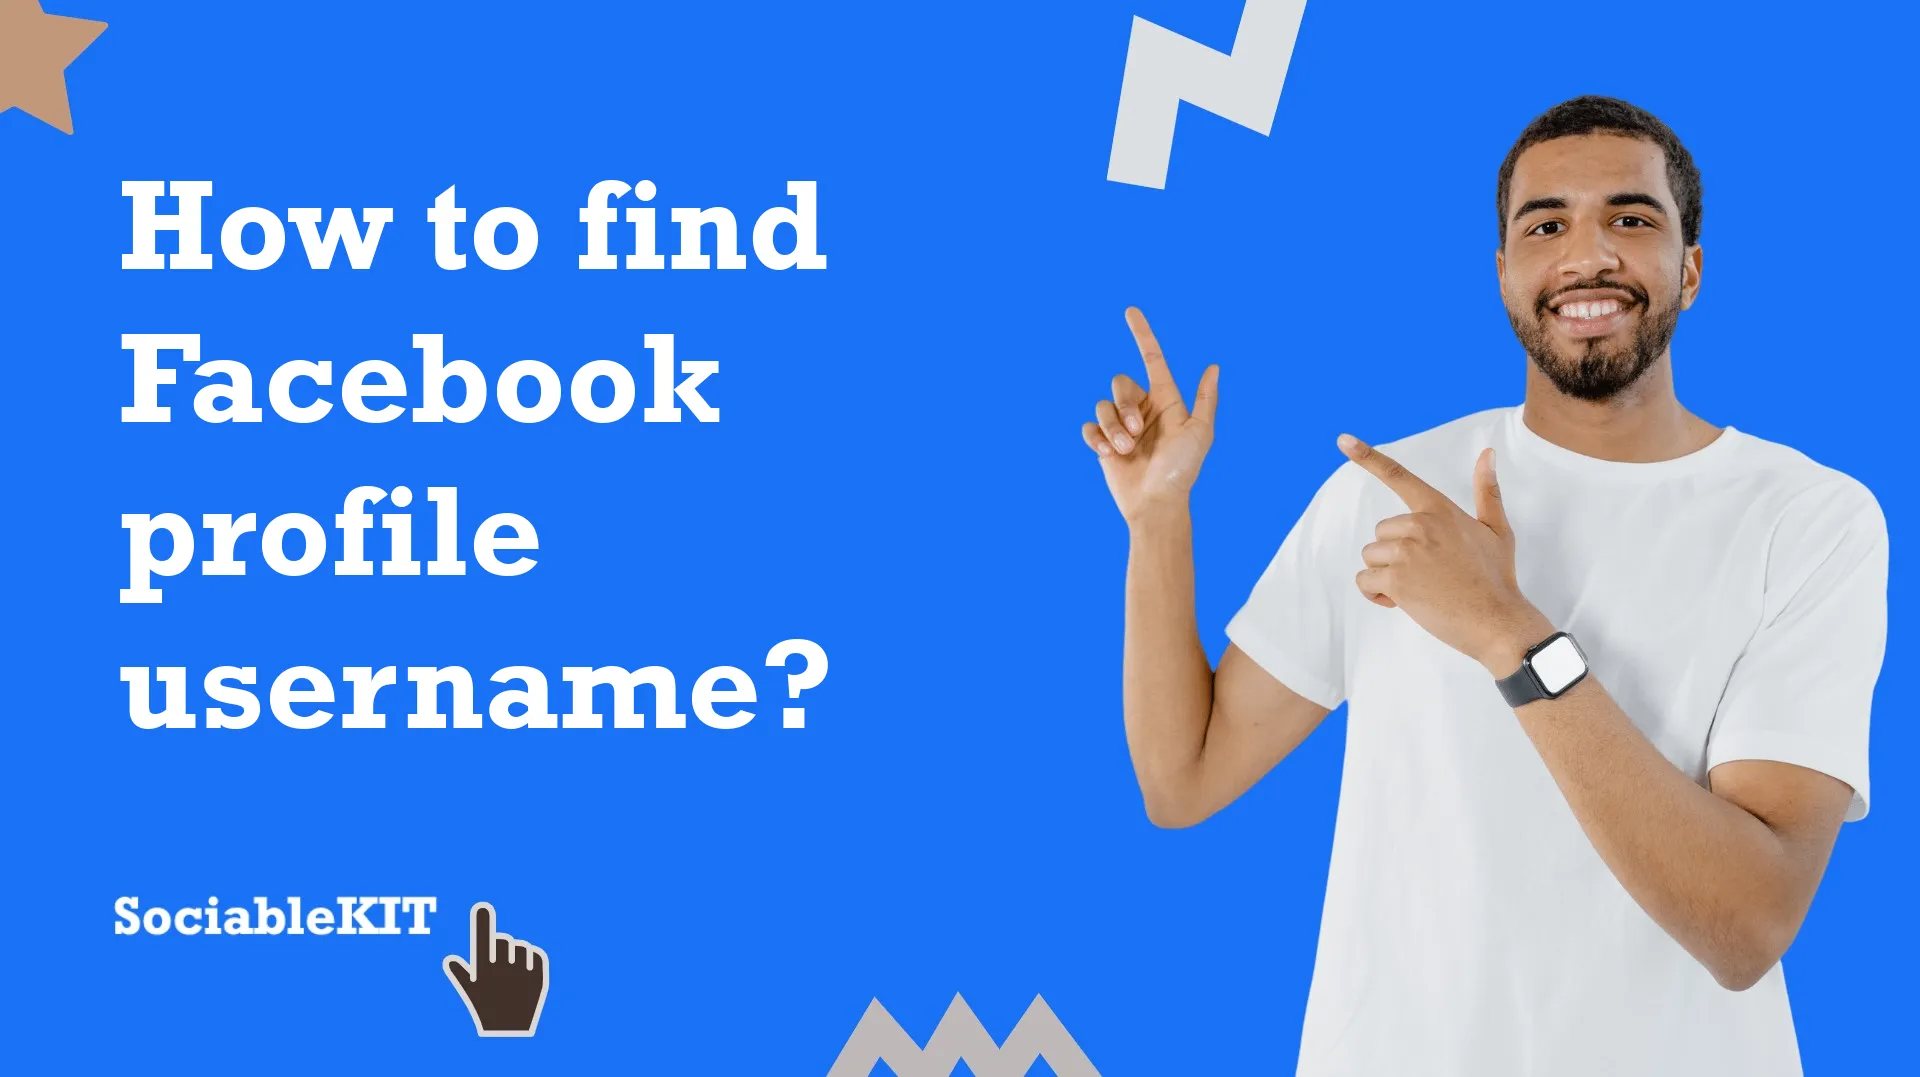 How to find Facebook profile username?